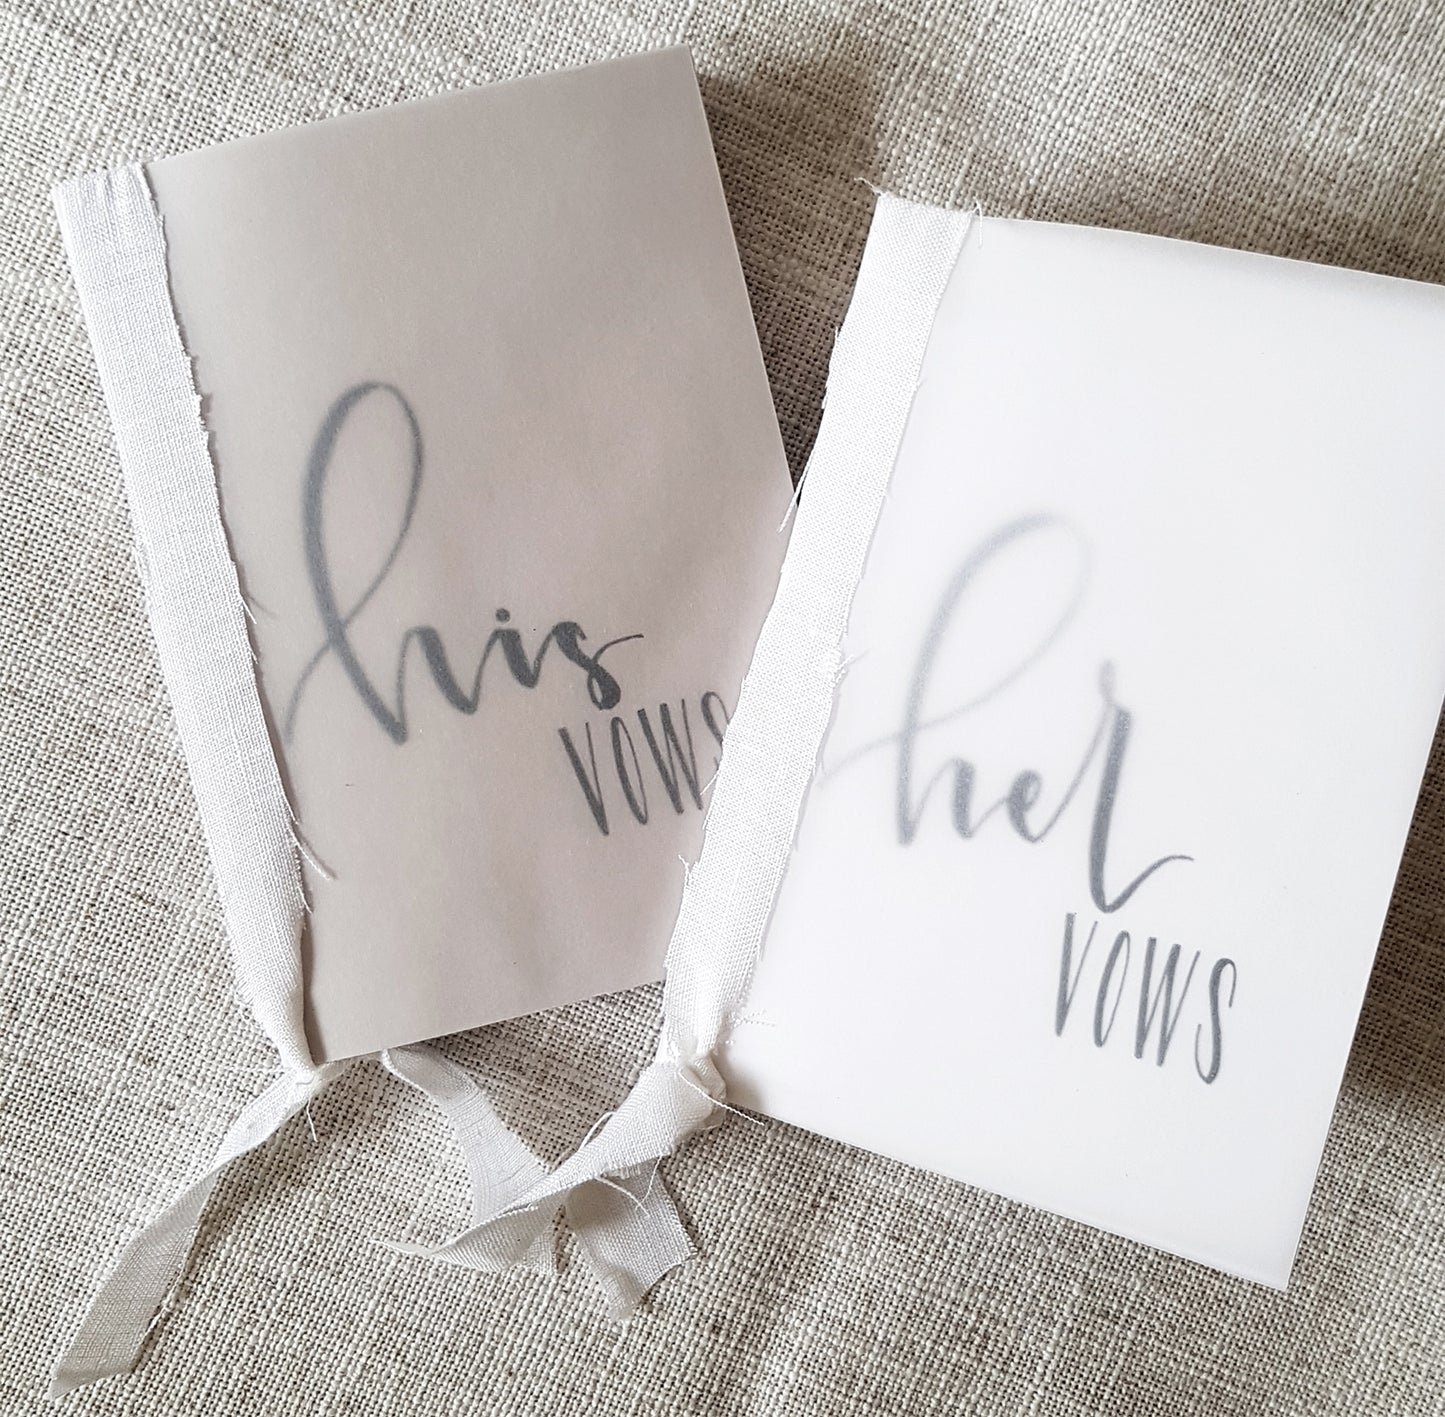 His and Her's Wedding Vows Booklets